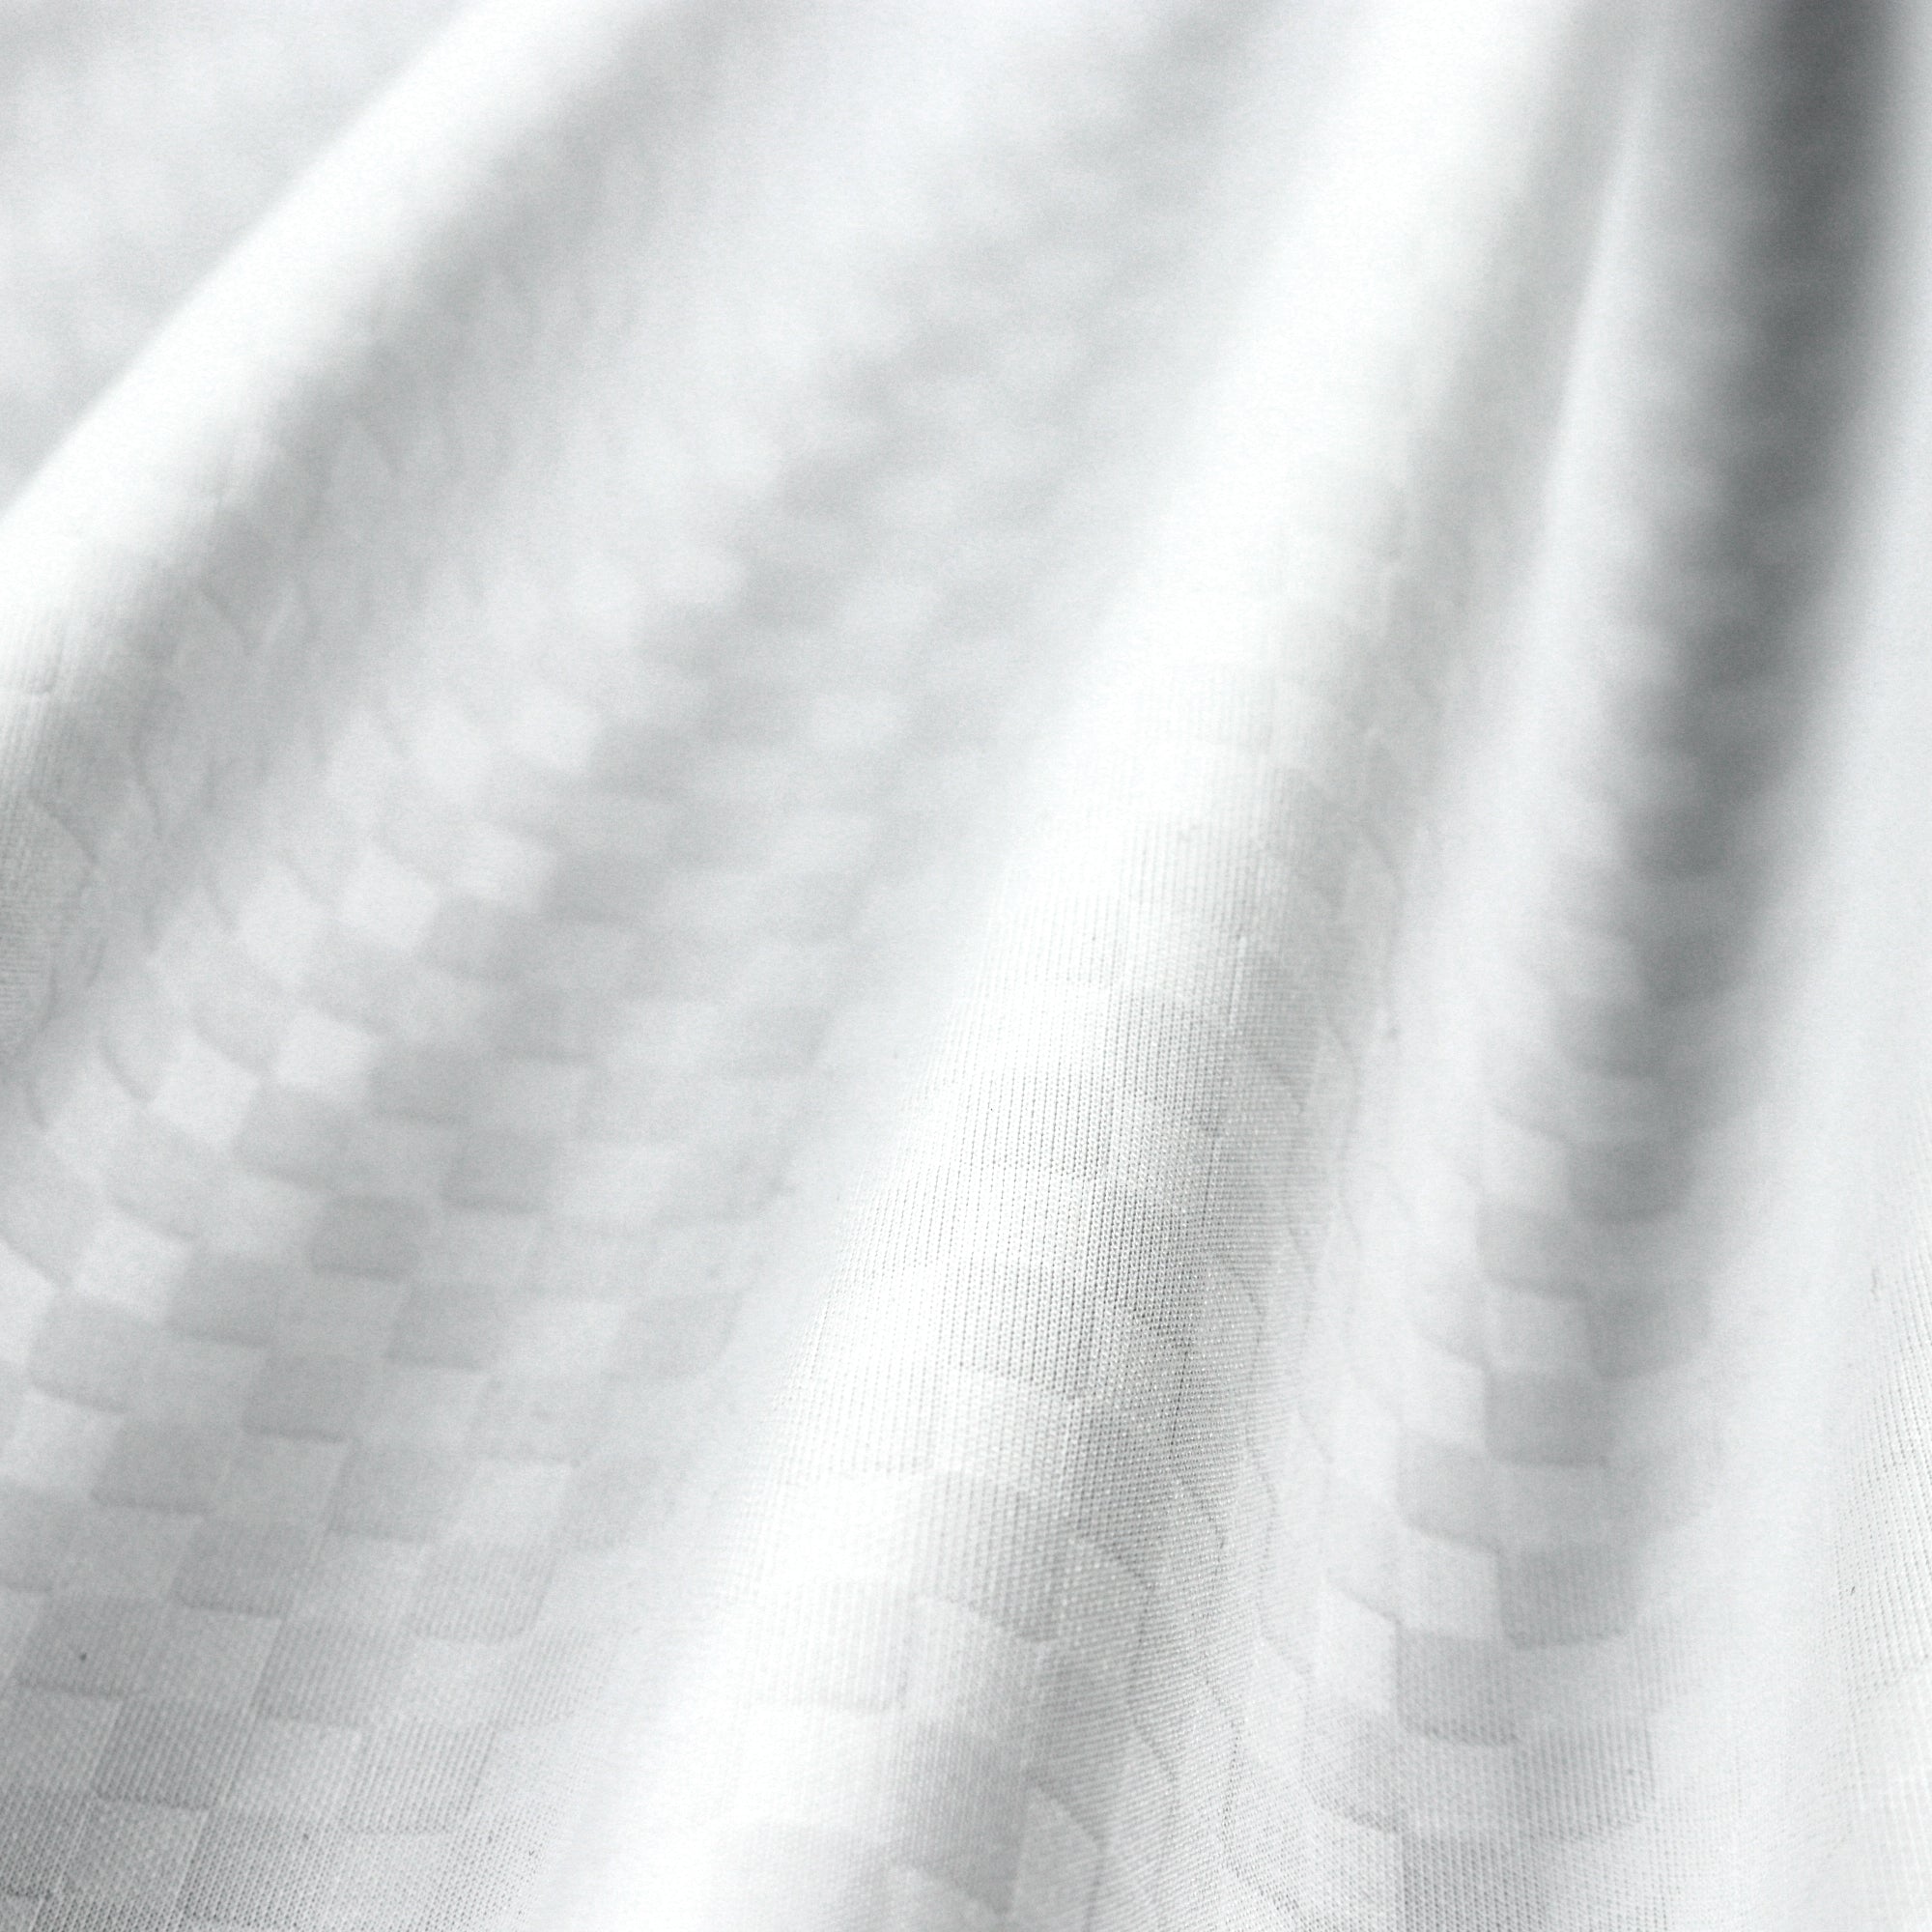 Neoprene FABRIC by the Yard, 1.5mm Anti-microbial Odor-preventing Quick-dry  Uv-protection Breathable , 58-60 Wide 